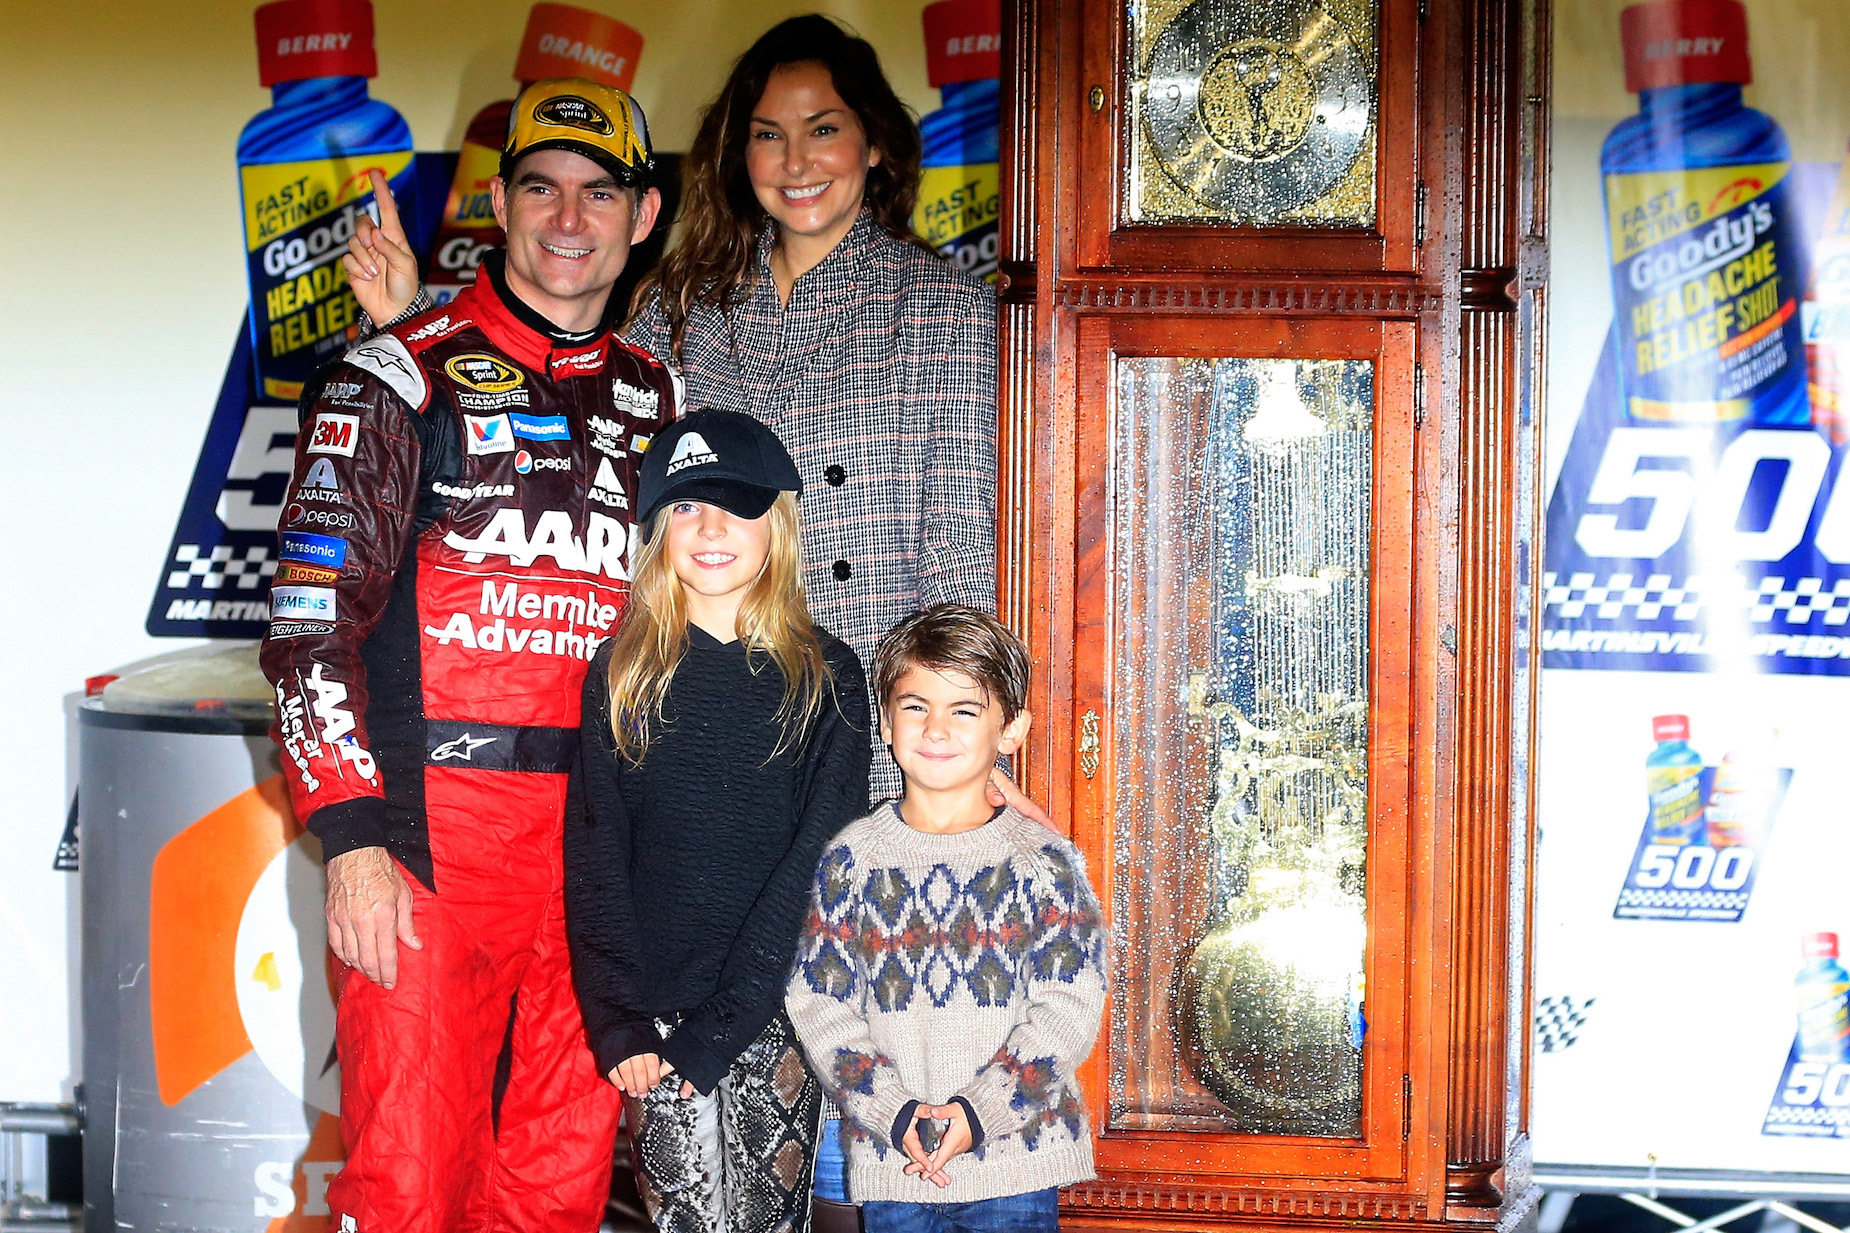 While Jeff Gordon had a long and decorated NASCAR career, he retired before injuries ruined his quality of life.